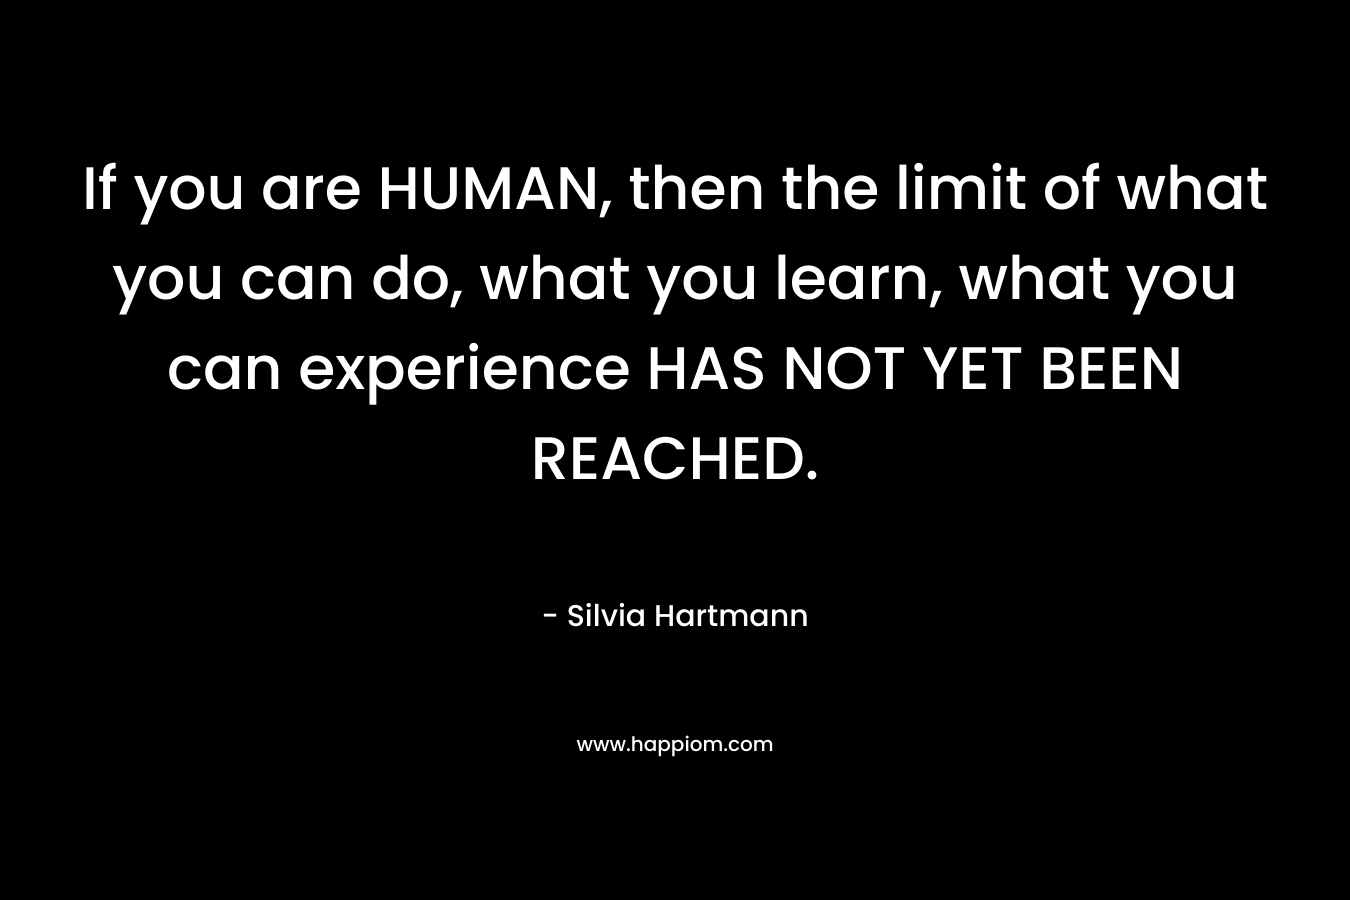 If you are HUMAN, then the limit of what you can do, what you learn, what you can experience HAS NOT YET BEEN REACHED. – Silvia Hartmann